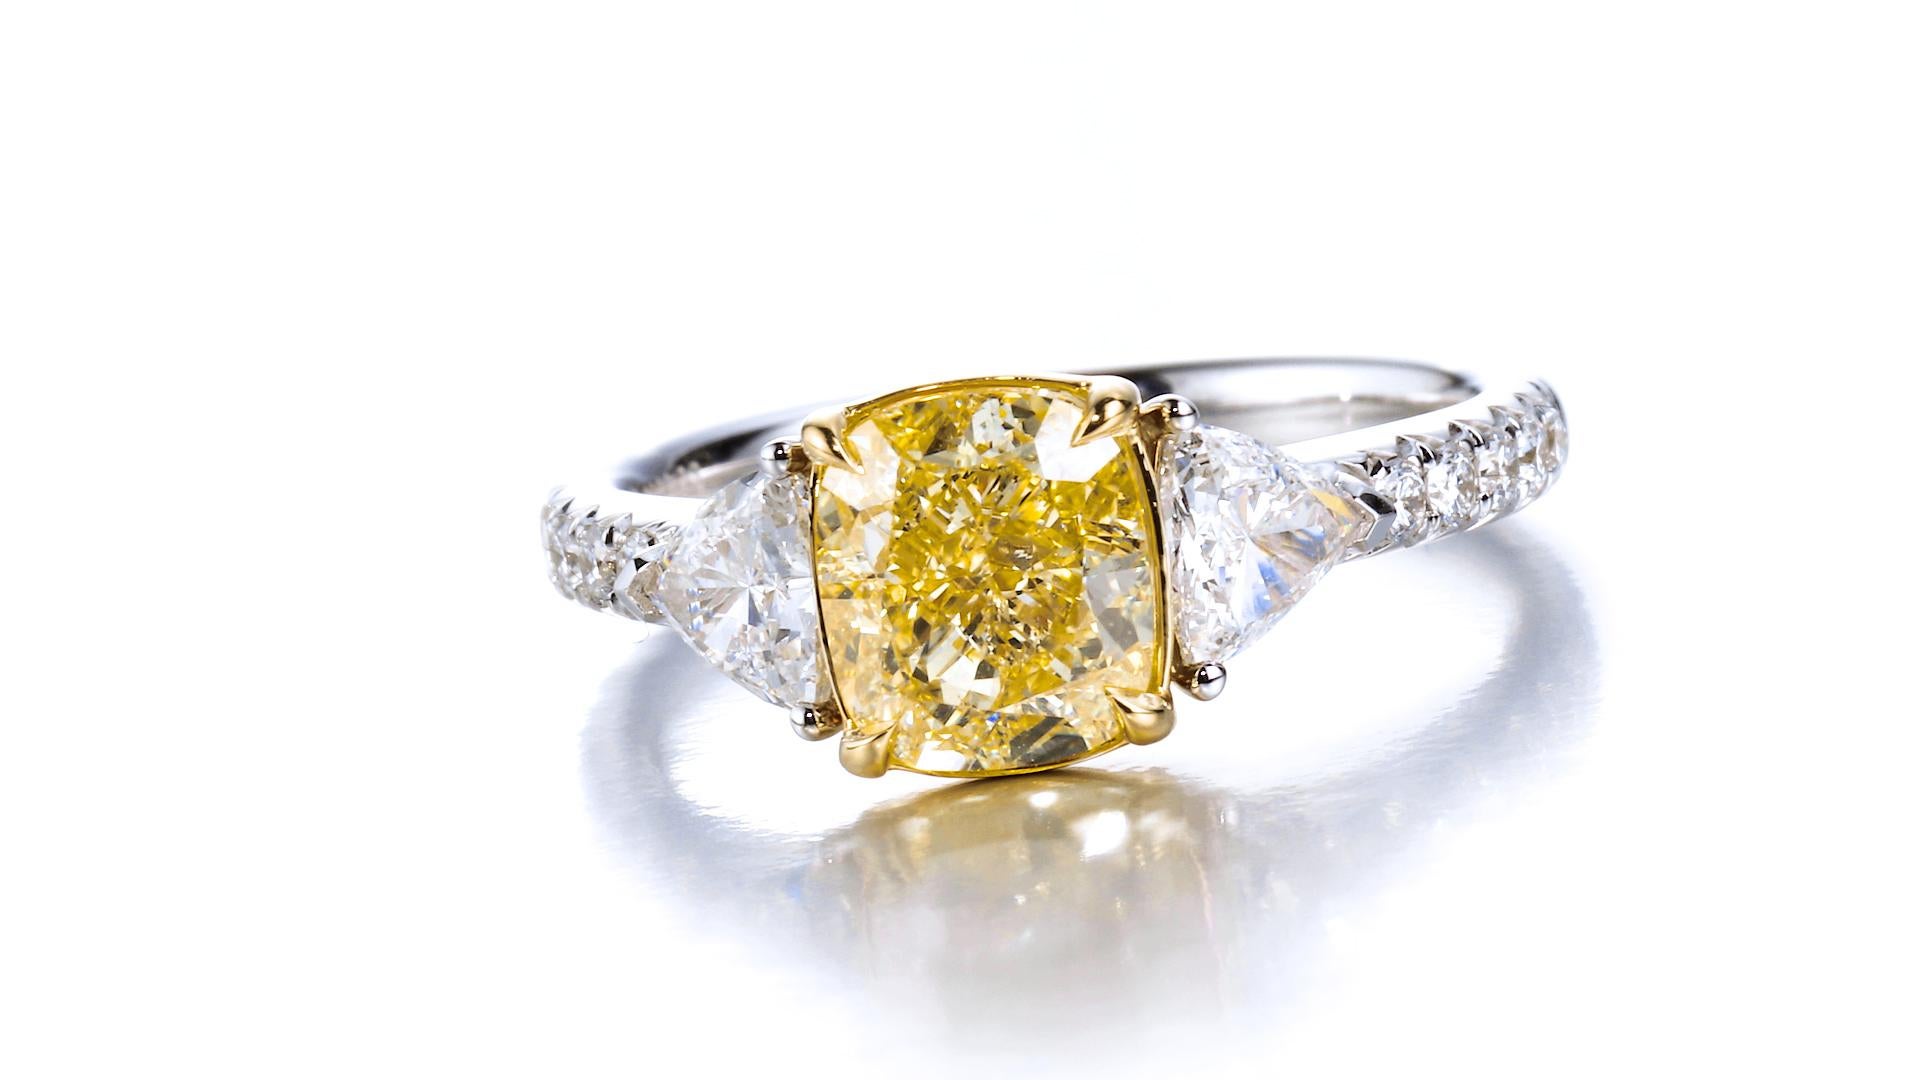 GIA Certified 2.03ct Cushion Cut Natural Fancy Light Yellow Diamond Ring 18KT. For Sale 2